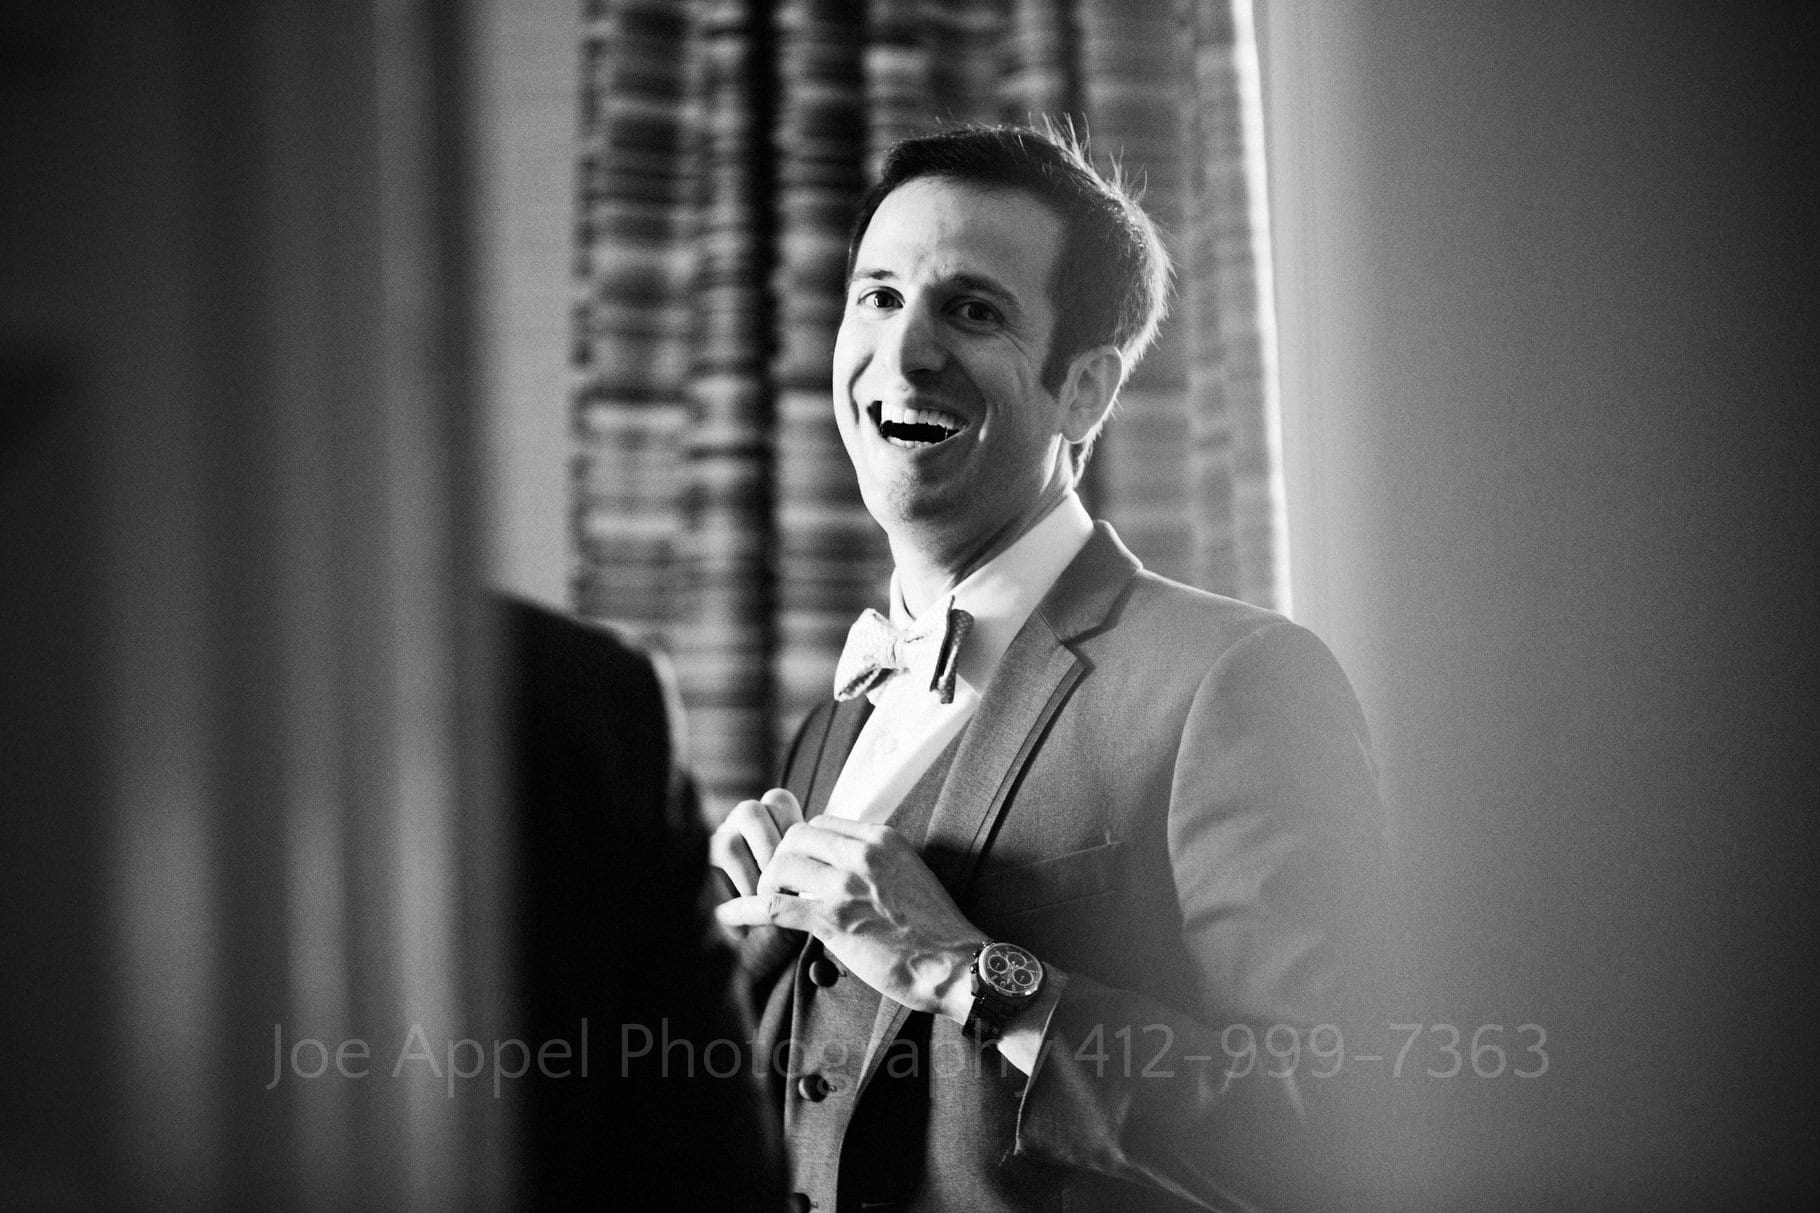 A young groom laughs as he buttons the shirt to his tuxedo in a room at the Duquesne Club.